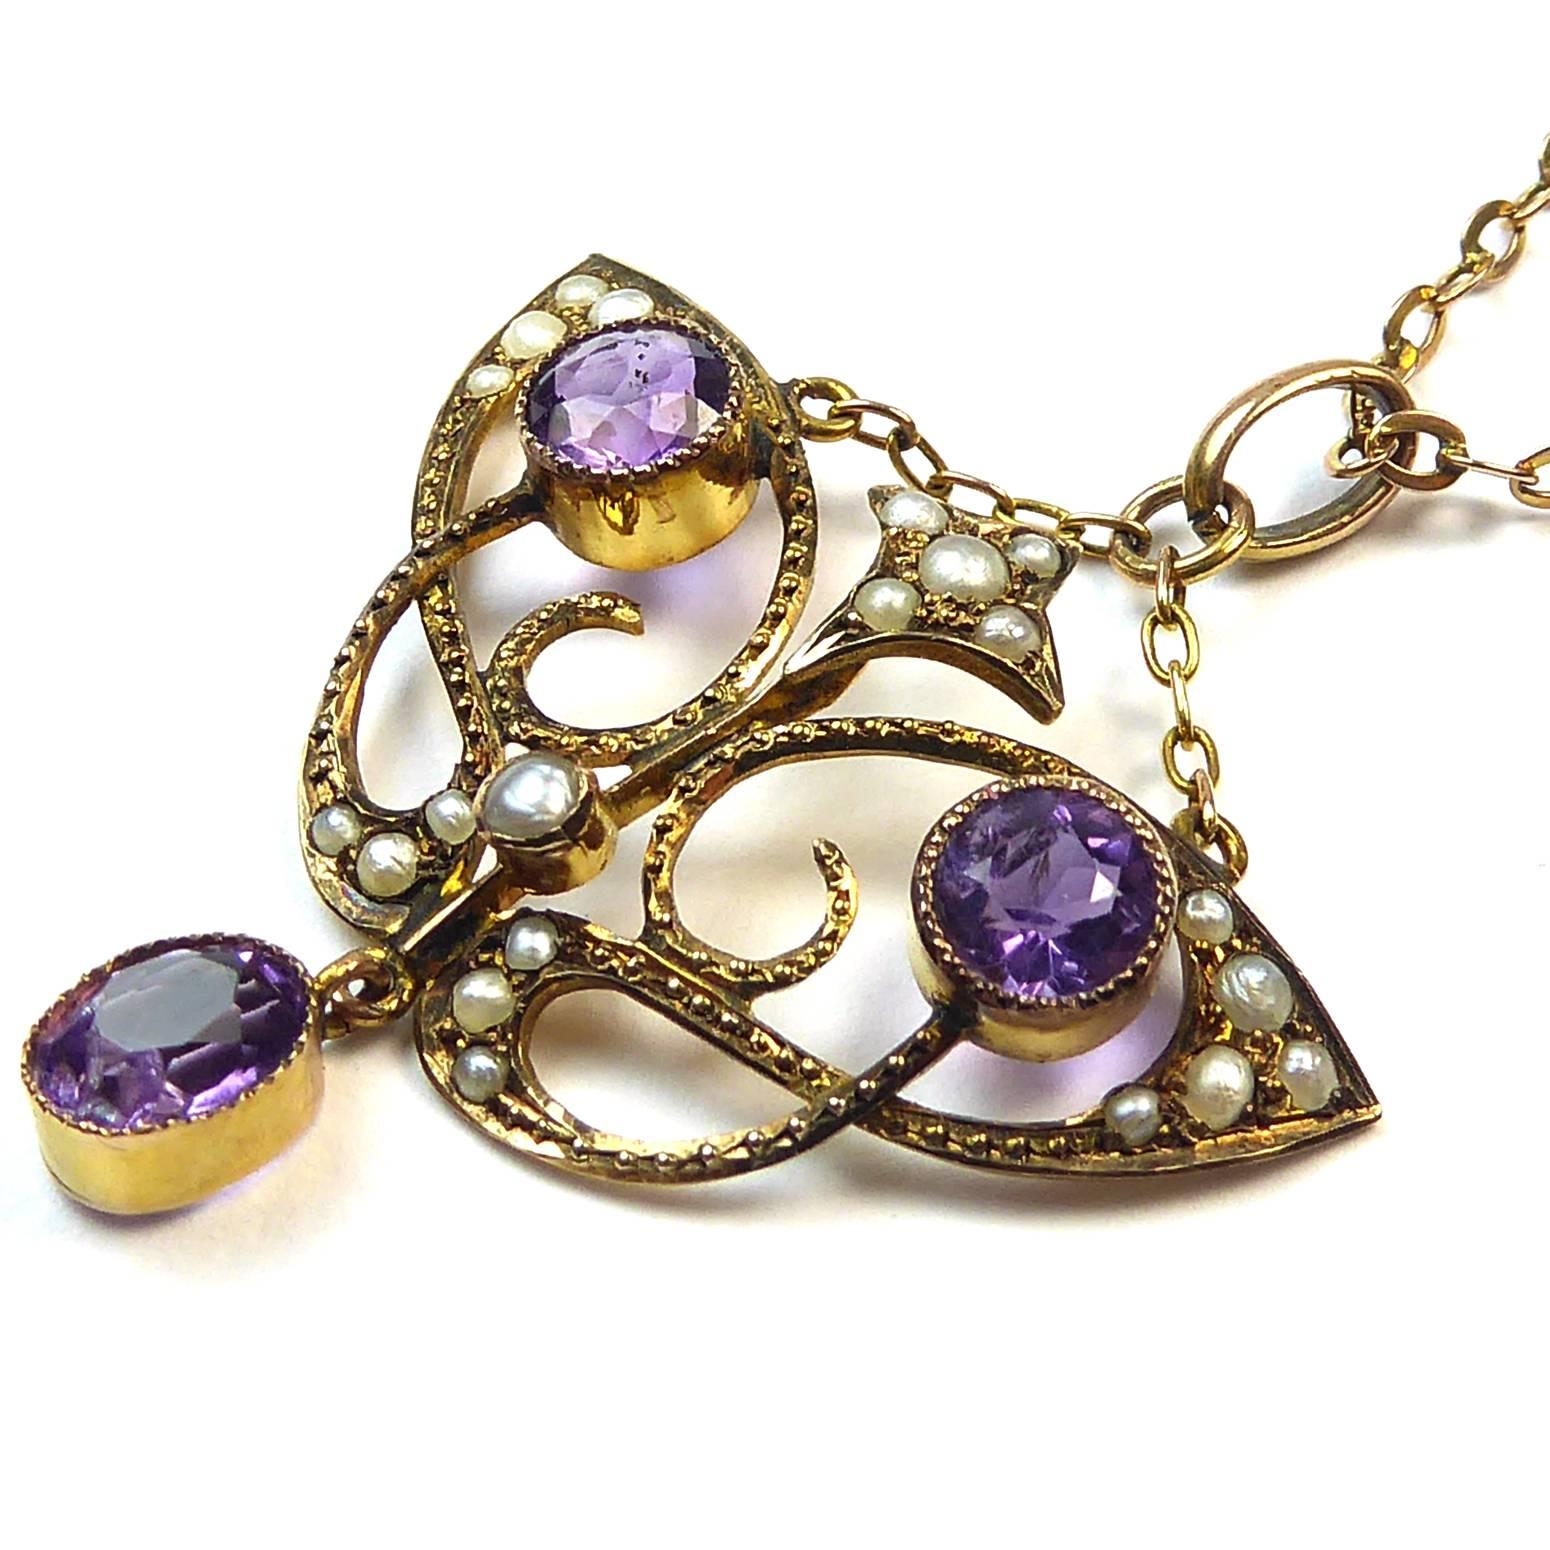 Gorgeous vintage necklace from the Art Nouveau period in a very stylized butterfly design.  Each 'wiing' is set with a rich purple amethyst with milled grain edges whilst curled around each of the gemstones is a flambouyant leaf design set with